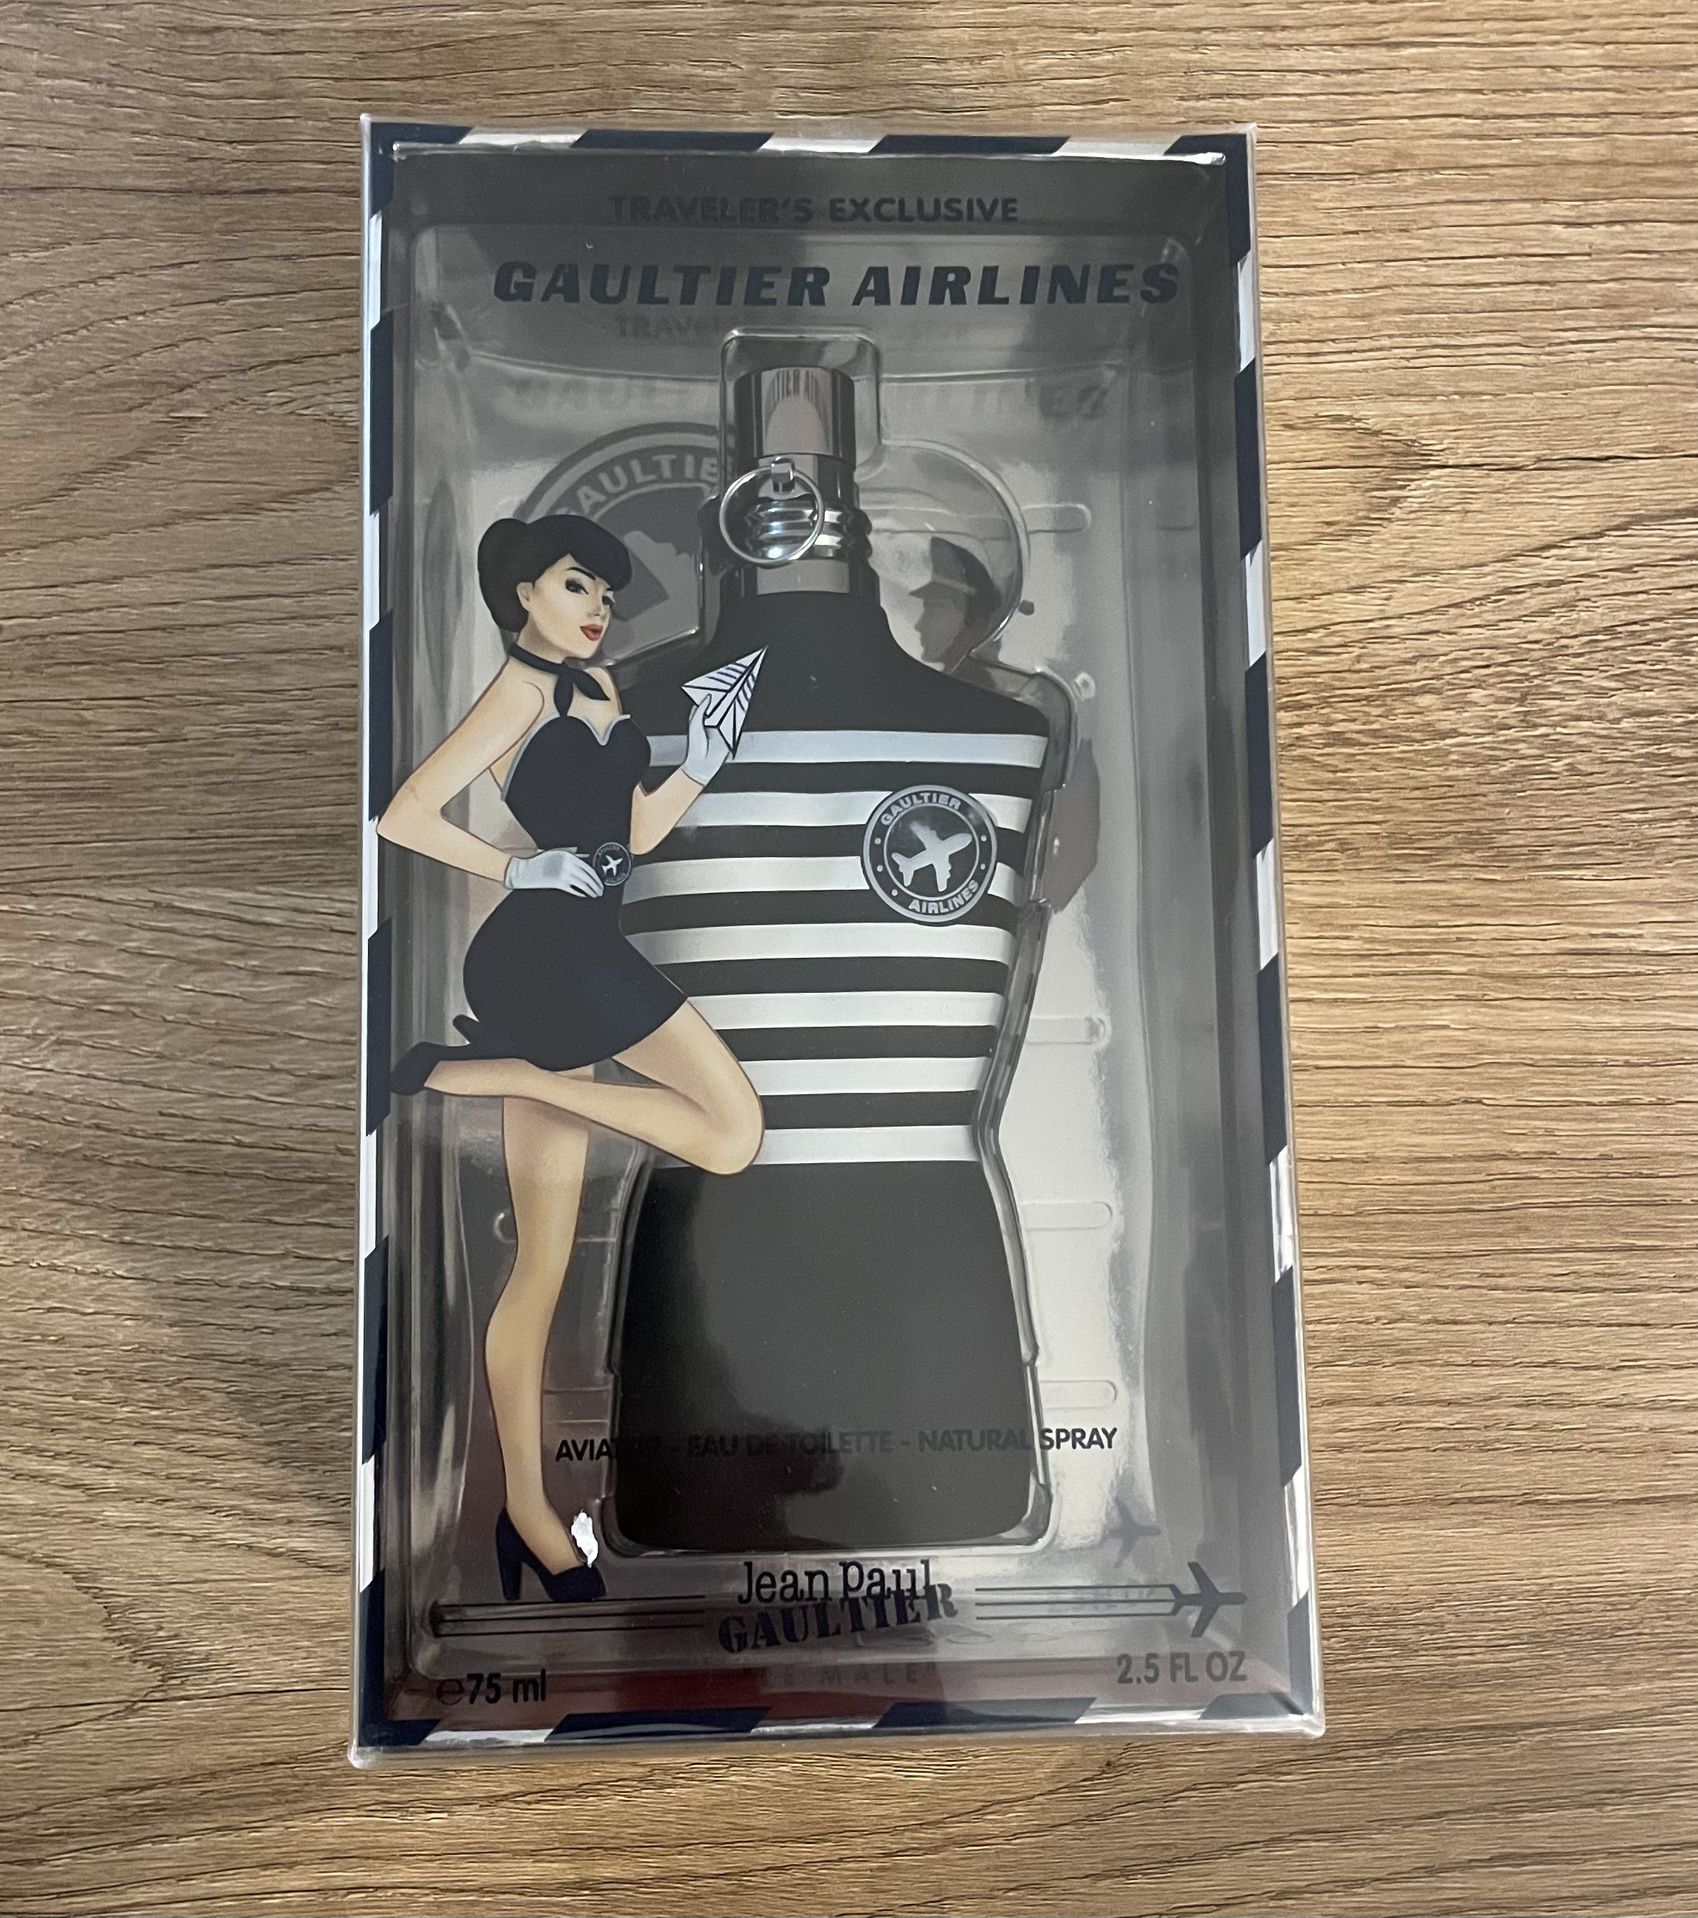 Gaultier Airlines Men’s Cologne